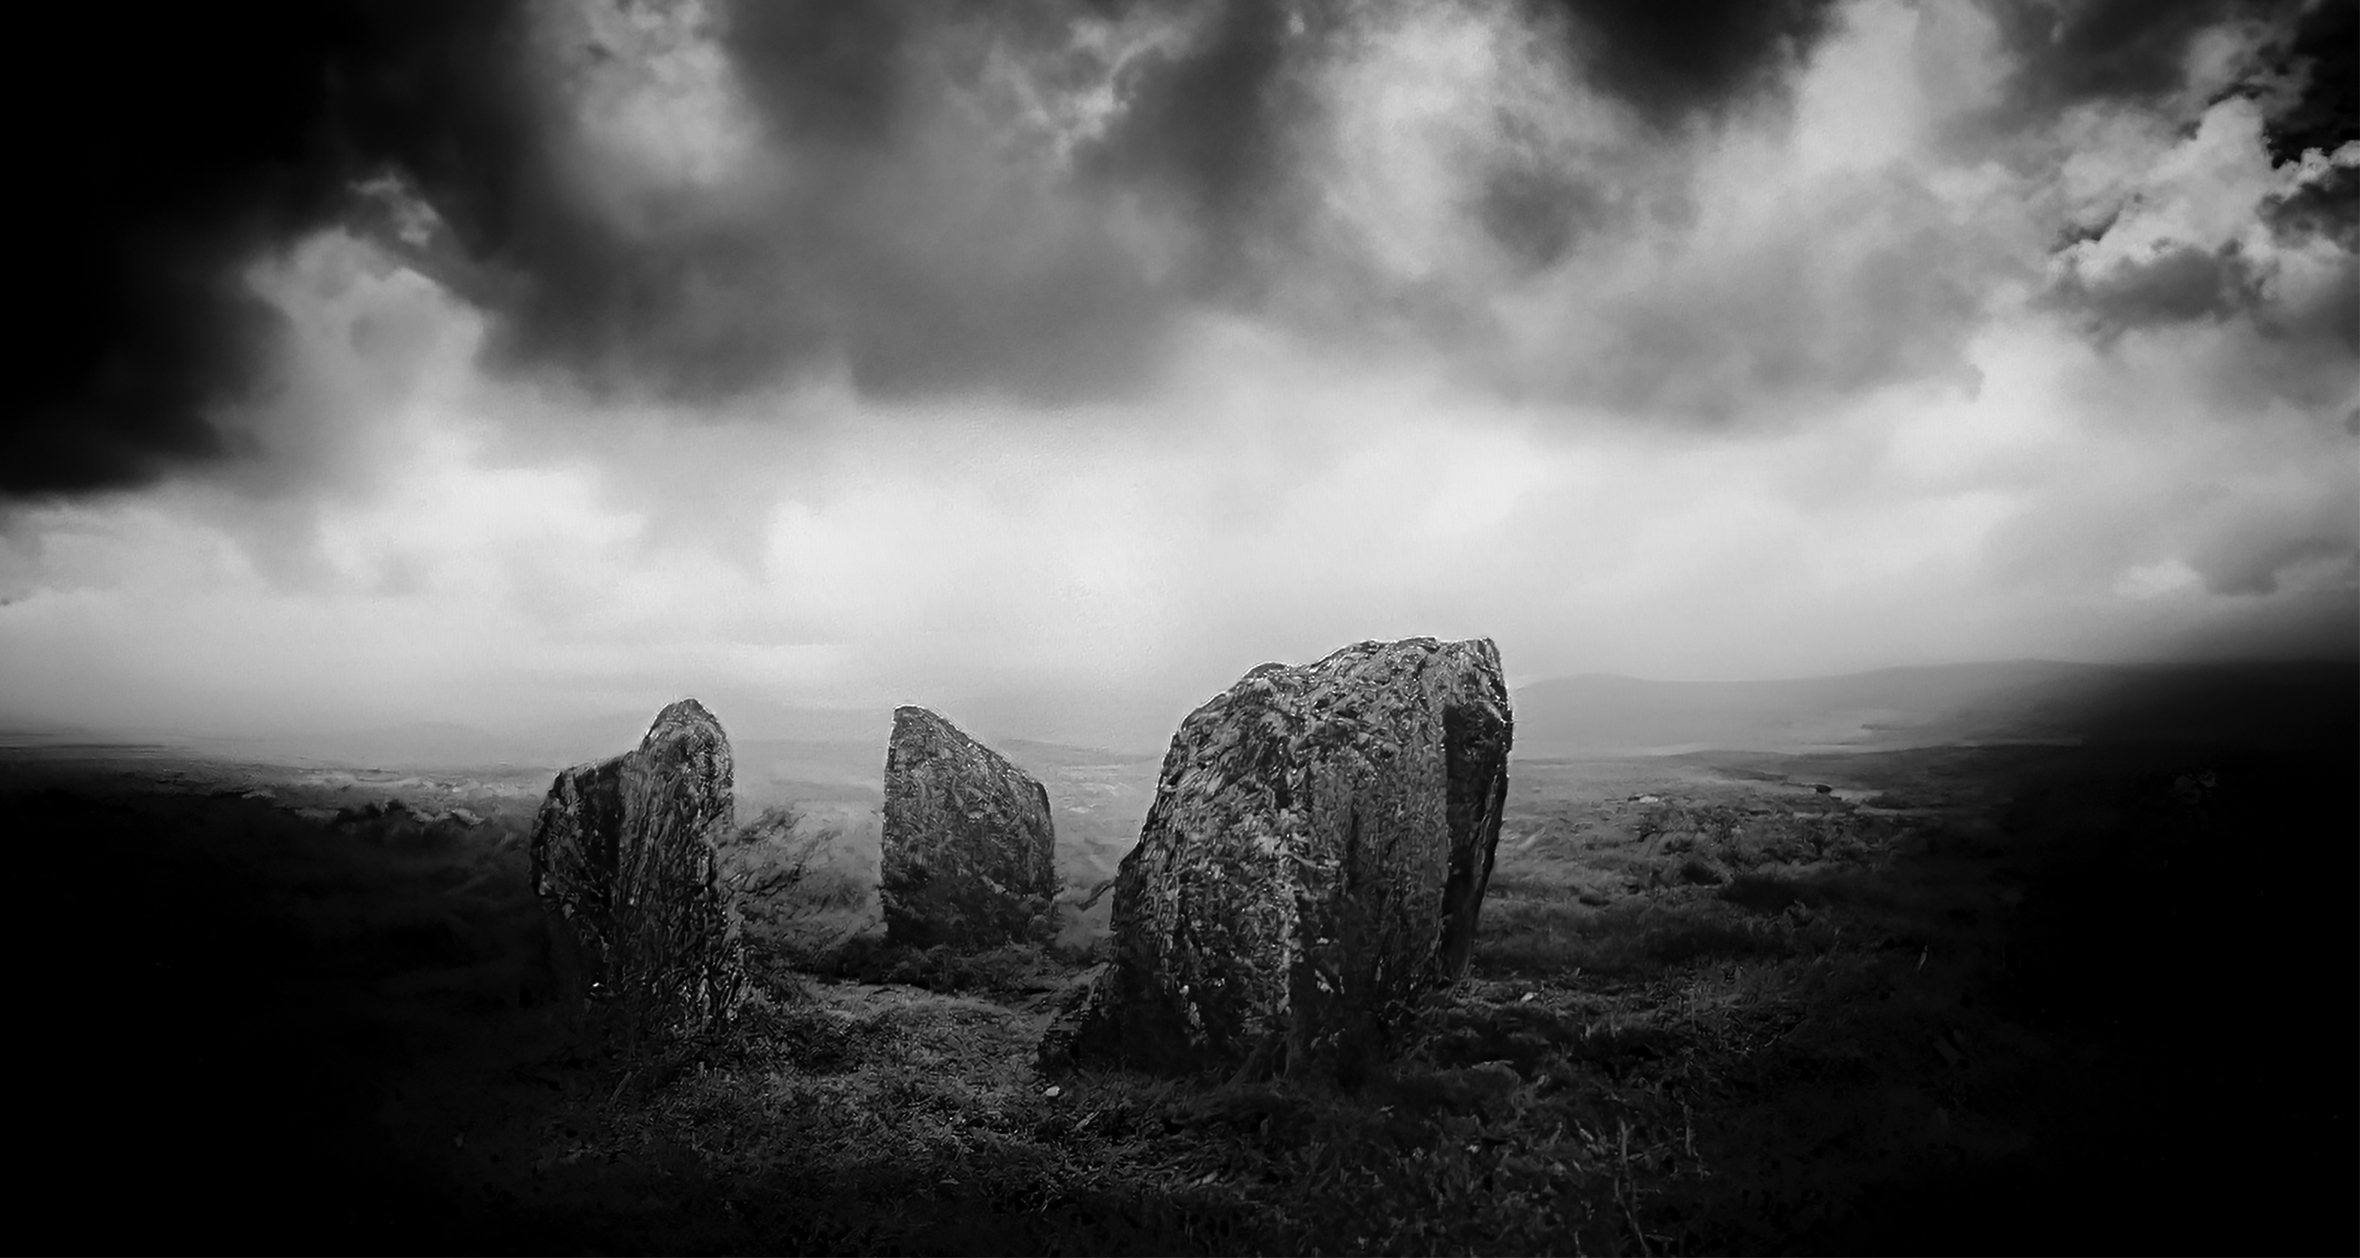 An ancient stone circle in Ireland on a very cloudy day.